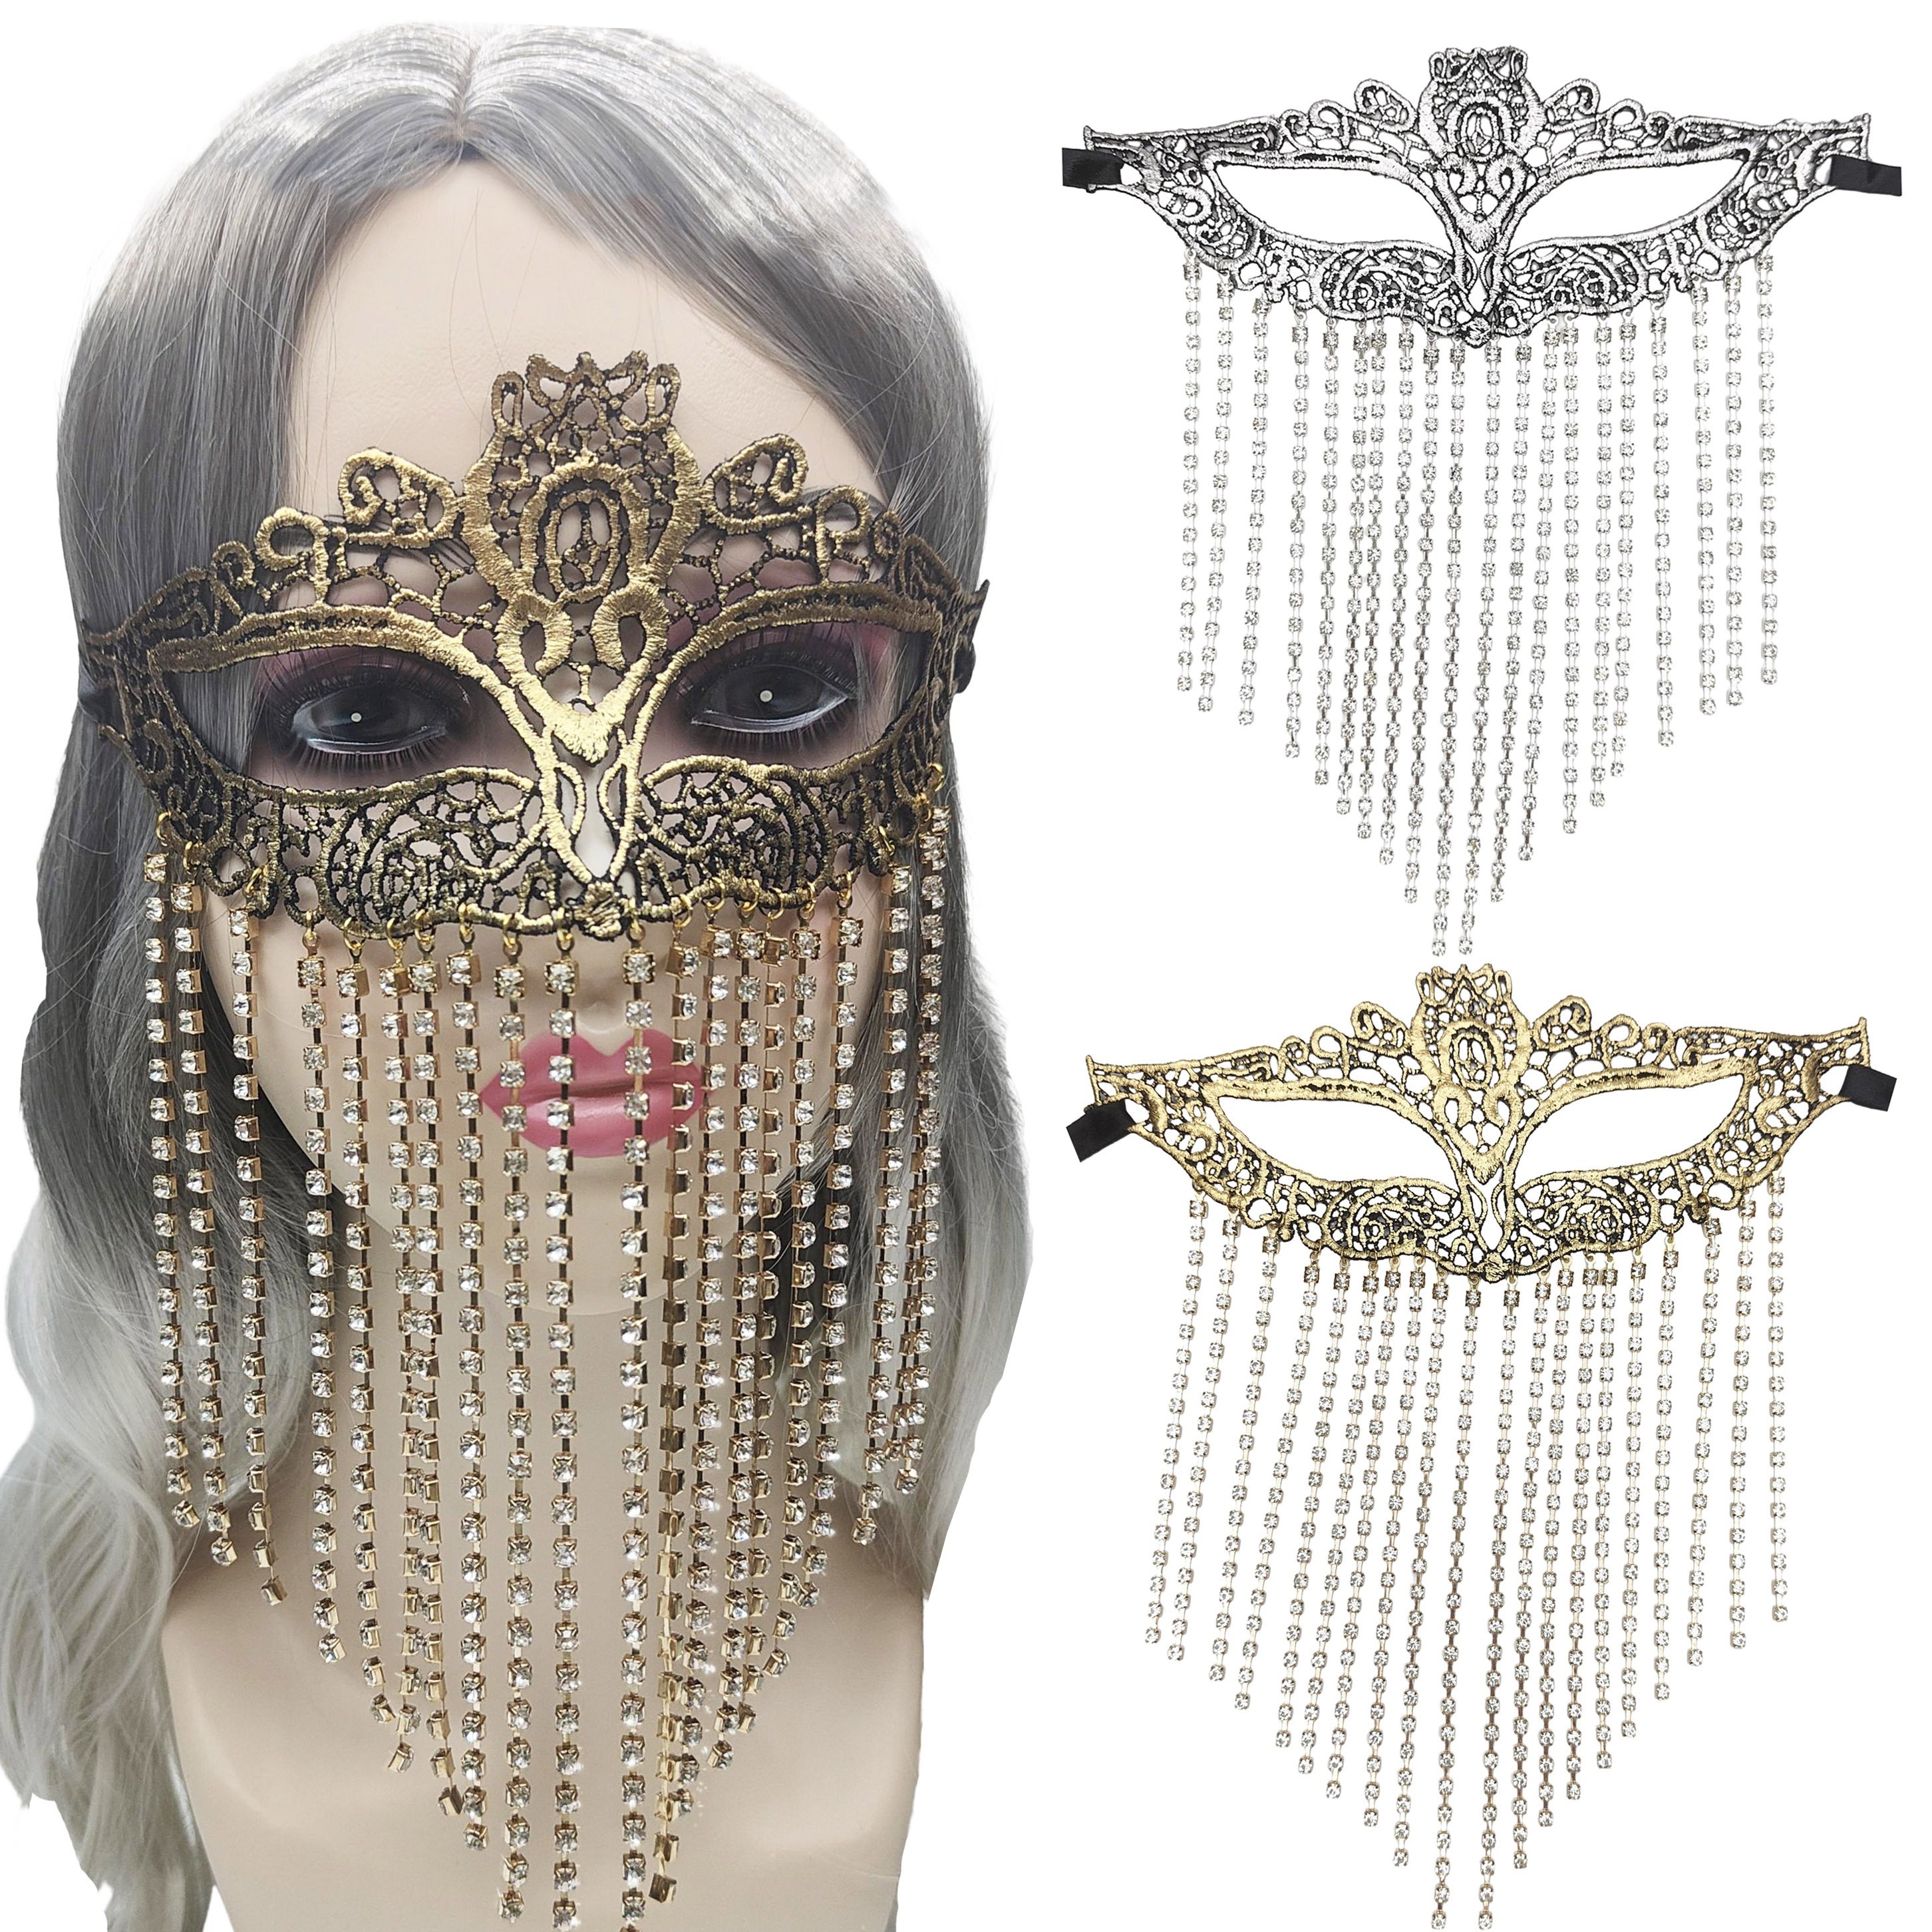 Christmas Masquerade Mask Golden Mental Half Face Decorative Props For  Carnival Party Cosplay Costume